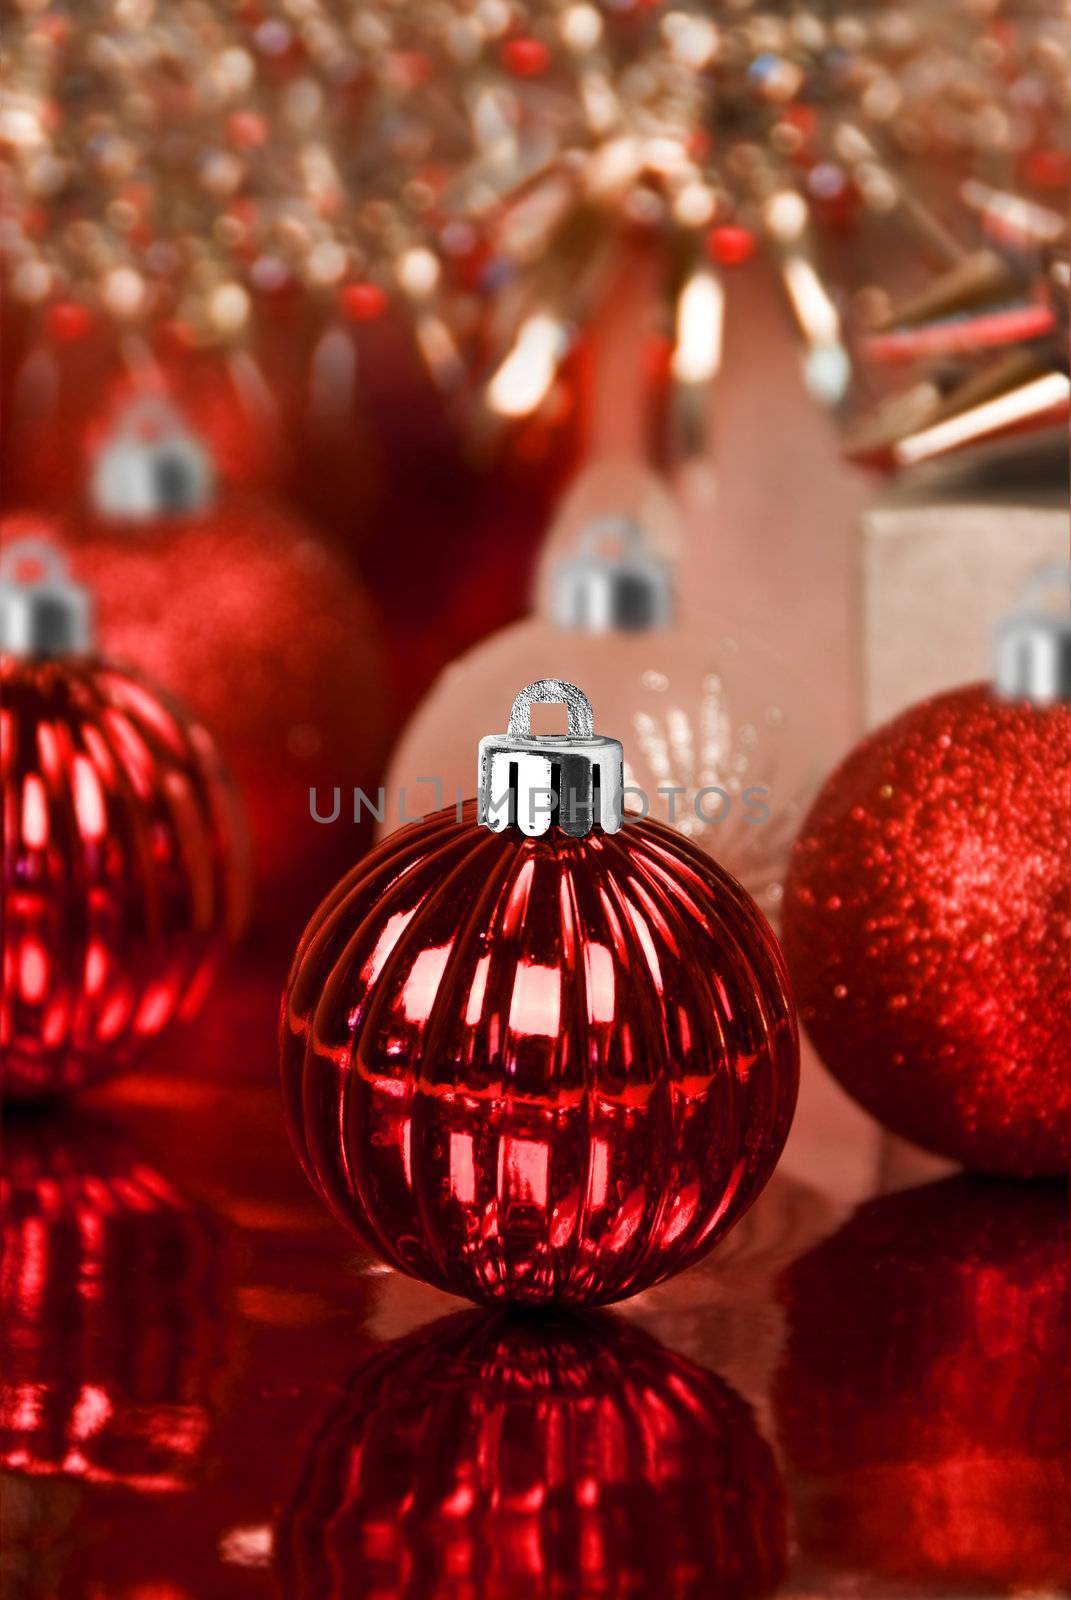 Red christmas ornaments with star background by tish1